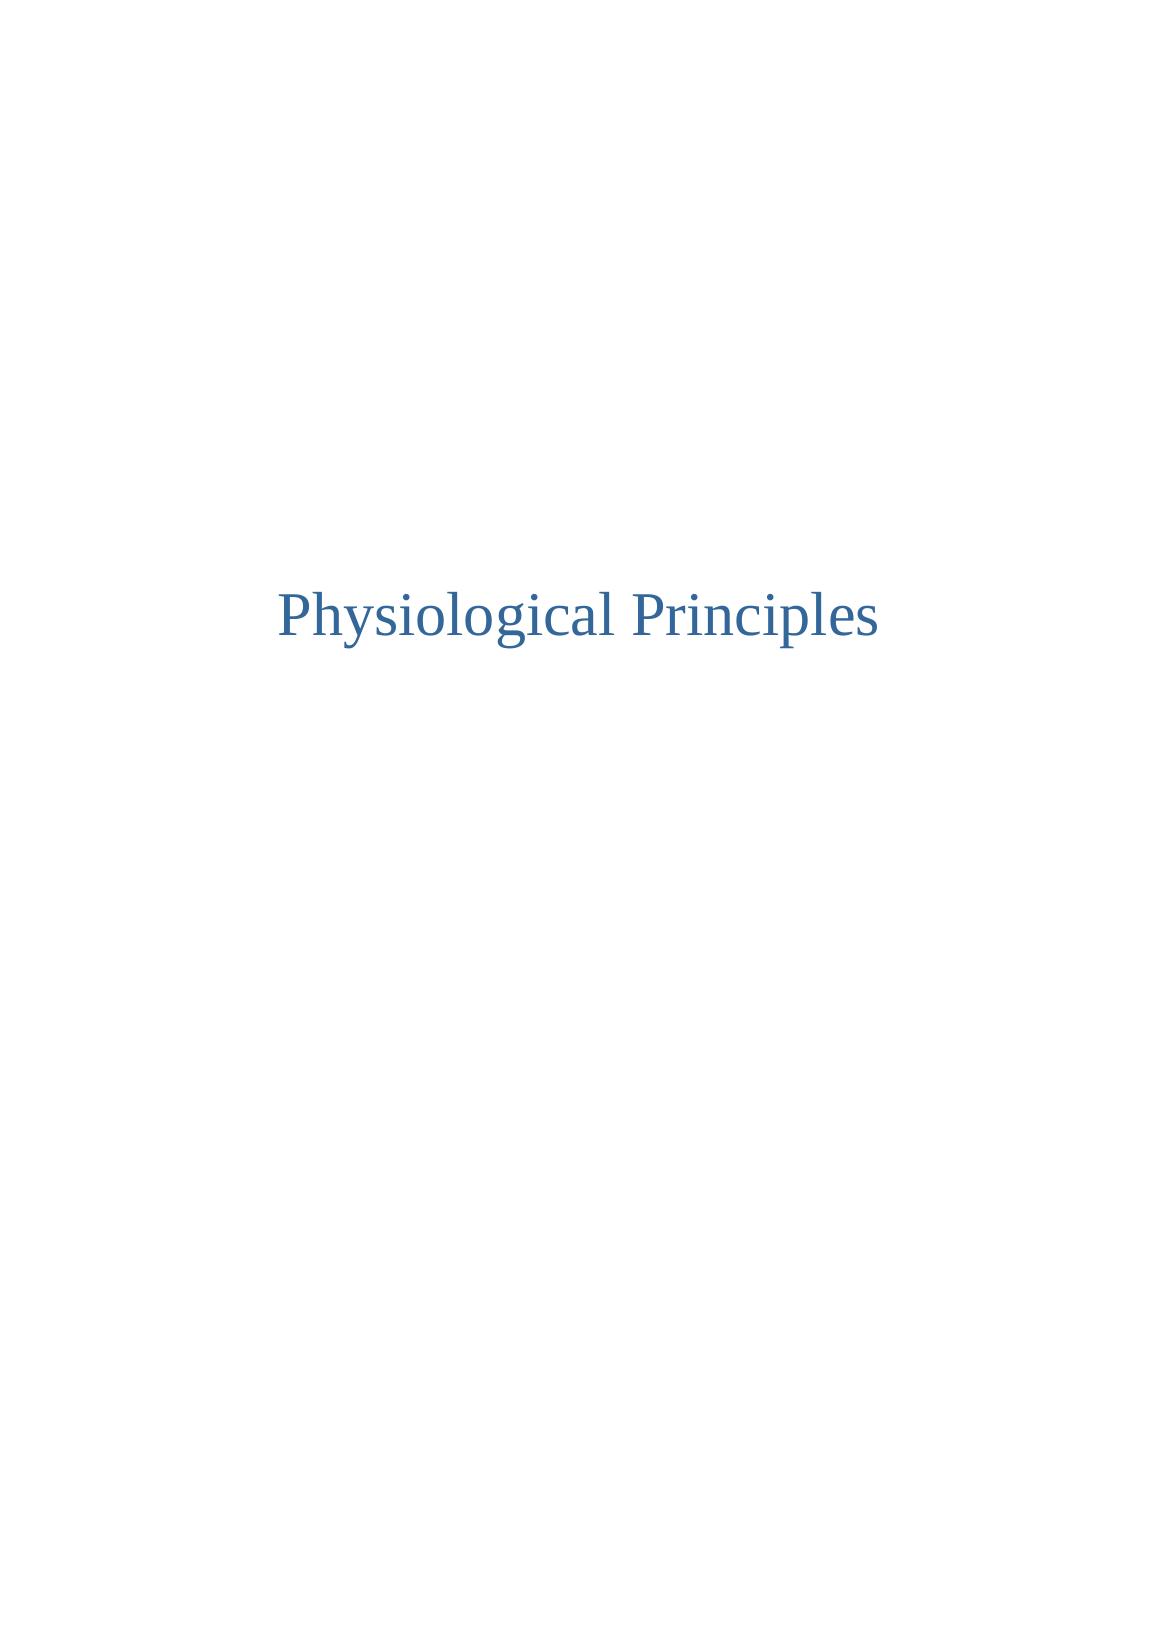 (PDF) Physiological Principles Of Human Body_1